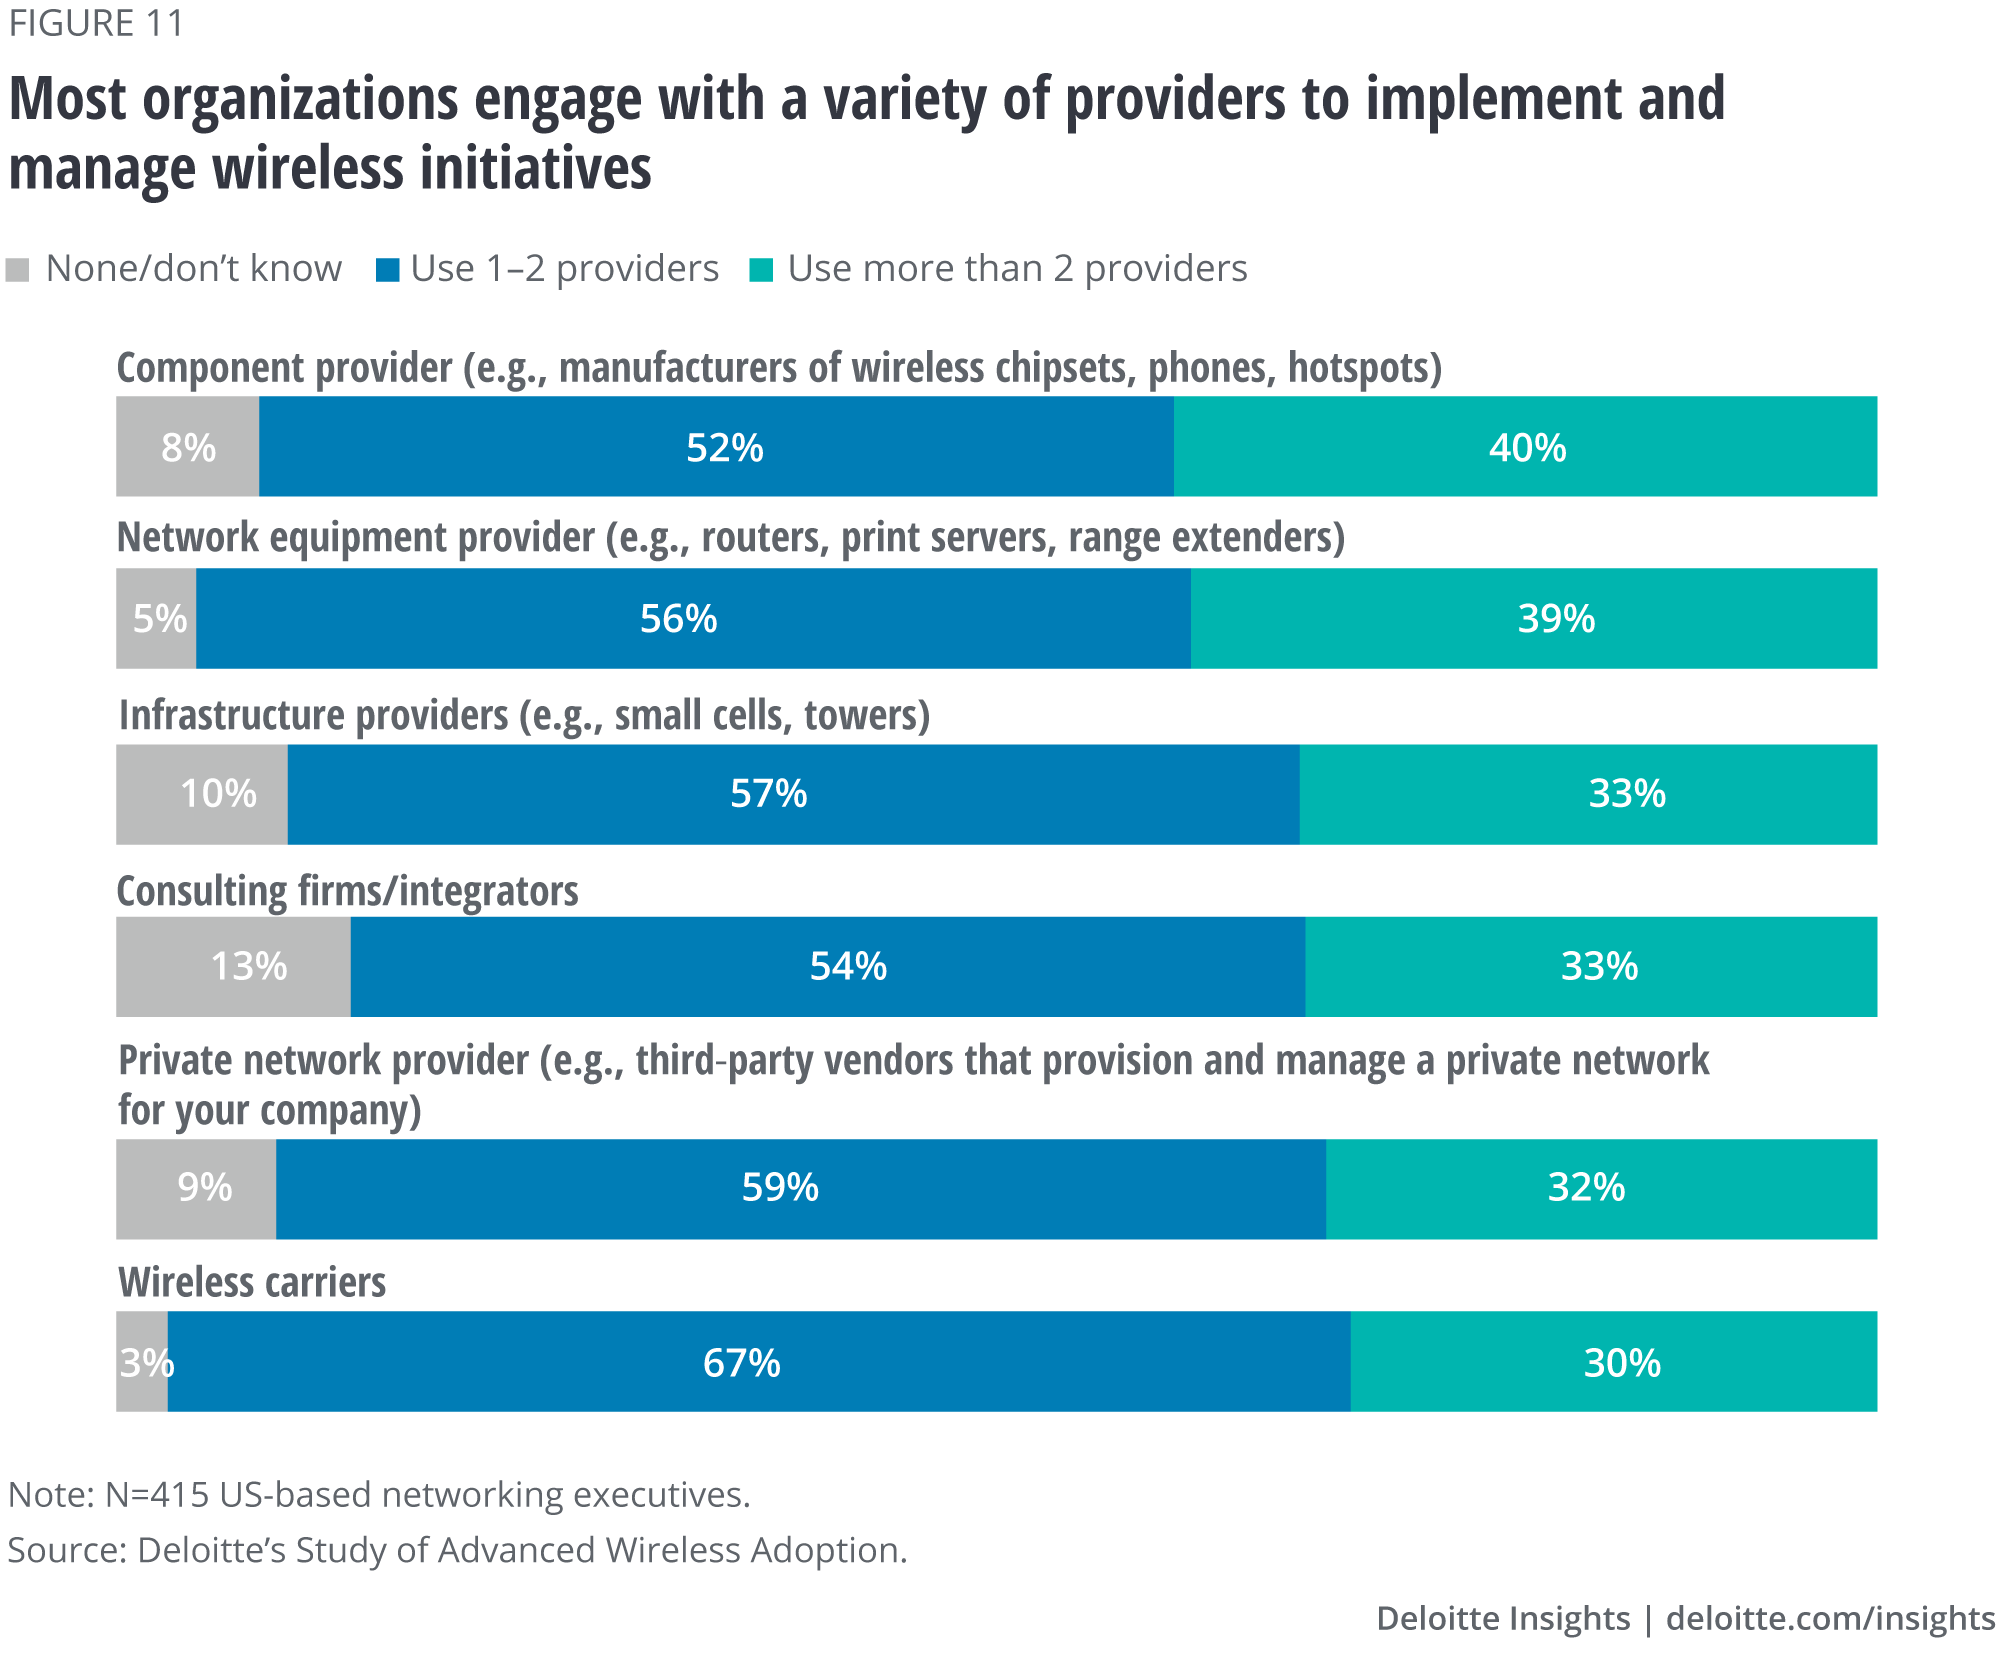 Most organizations engage with a variety of providers to implement and manage wireless initiatives